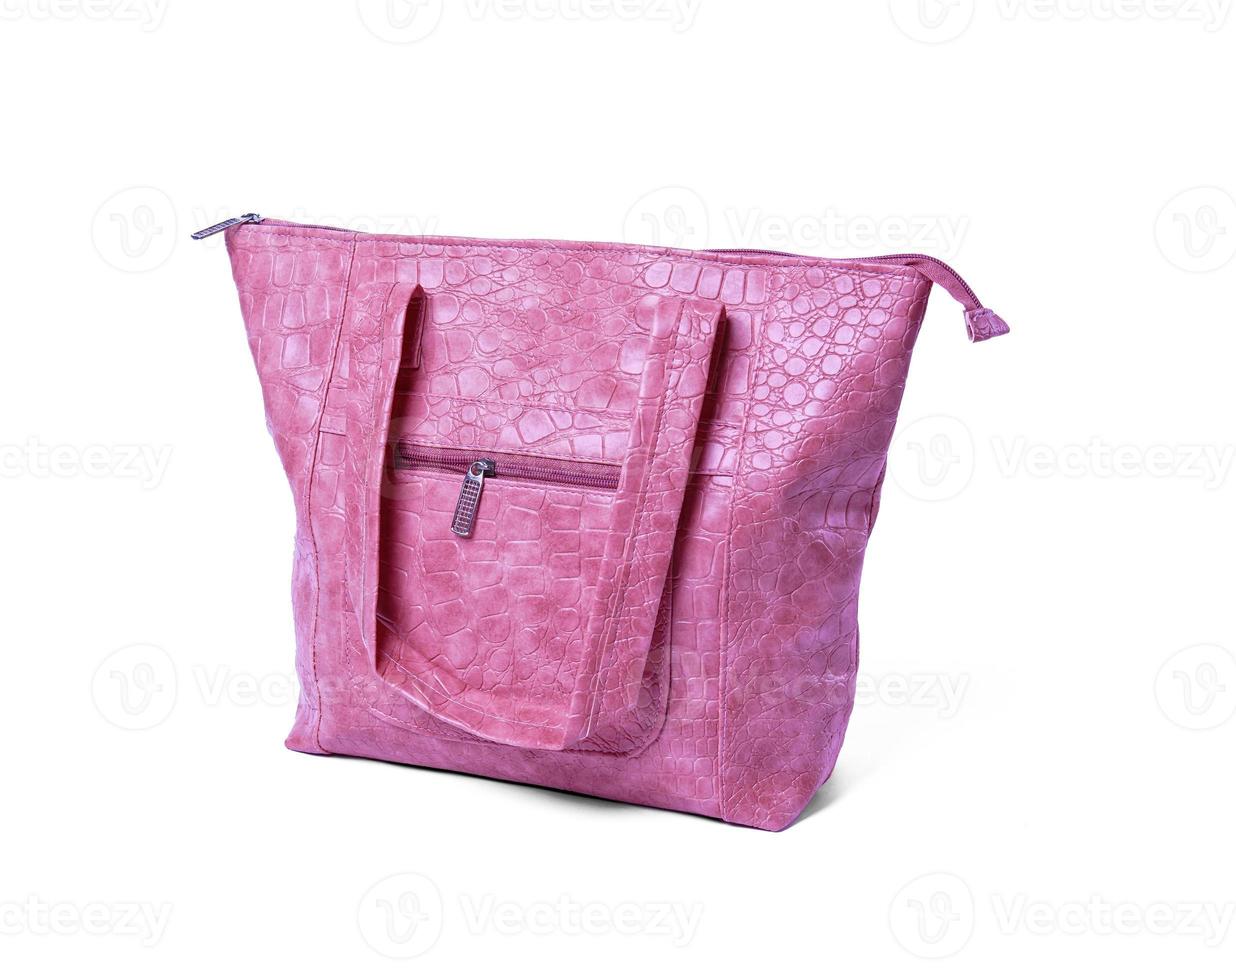 Luxury Women Bag Isolated on White Background. Side View of Pink Genuine Full Grain Leather Lady Shopping Handbags photo